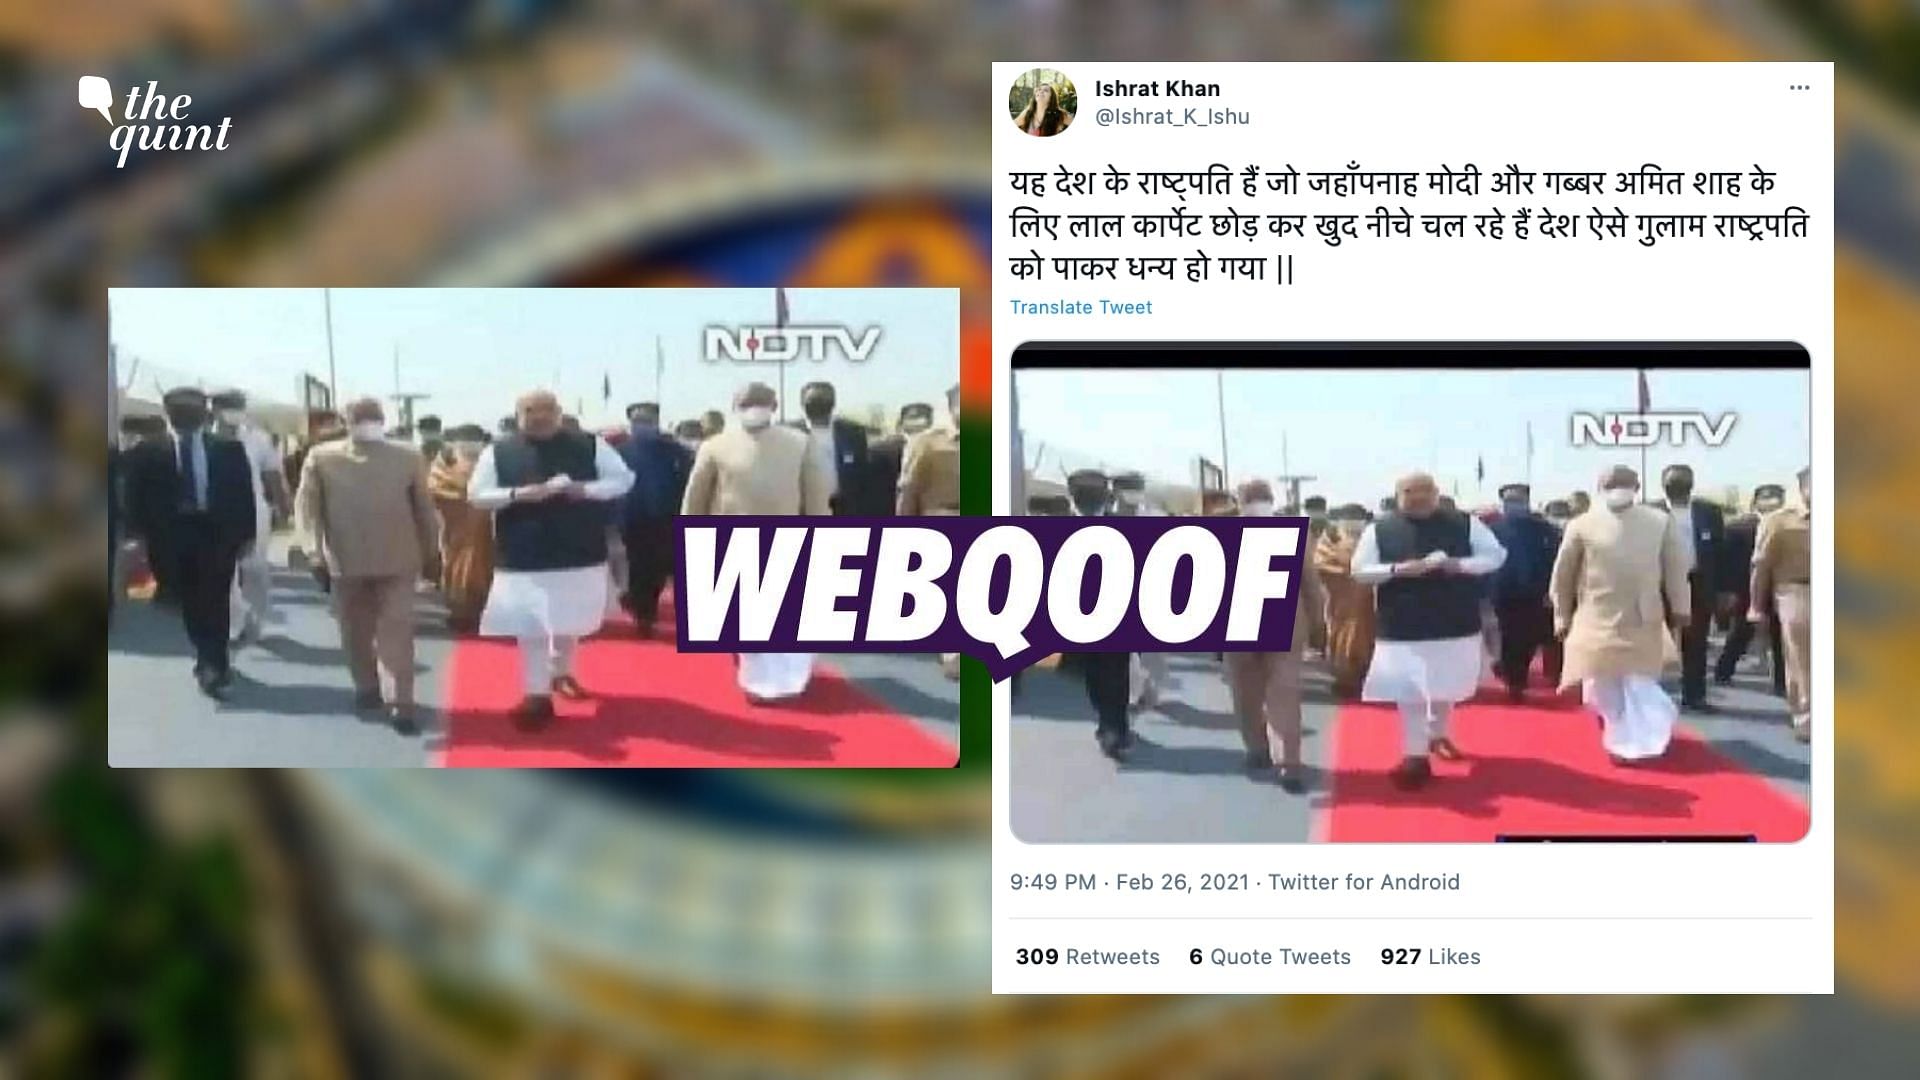 An image of President Ram Nath Kovind walking along with Union Home Minister Amit Shah during the inauguration ceremony of <a href="https://www.thequint.com/sports/cricket/motera-stadium-renamed-after-pm-narendra-modi-in-ahmedabad">Narendra Modi Stadium</a> in Ahmedabad has gone viral with a misleading claim.